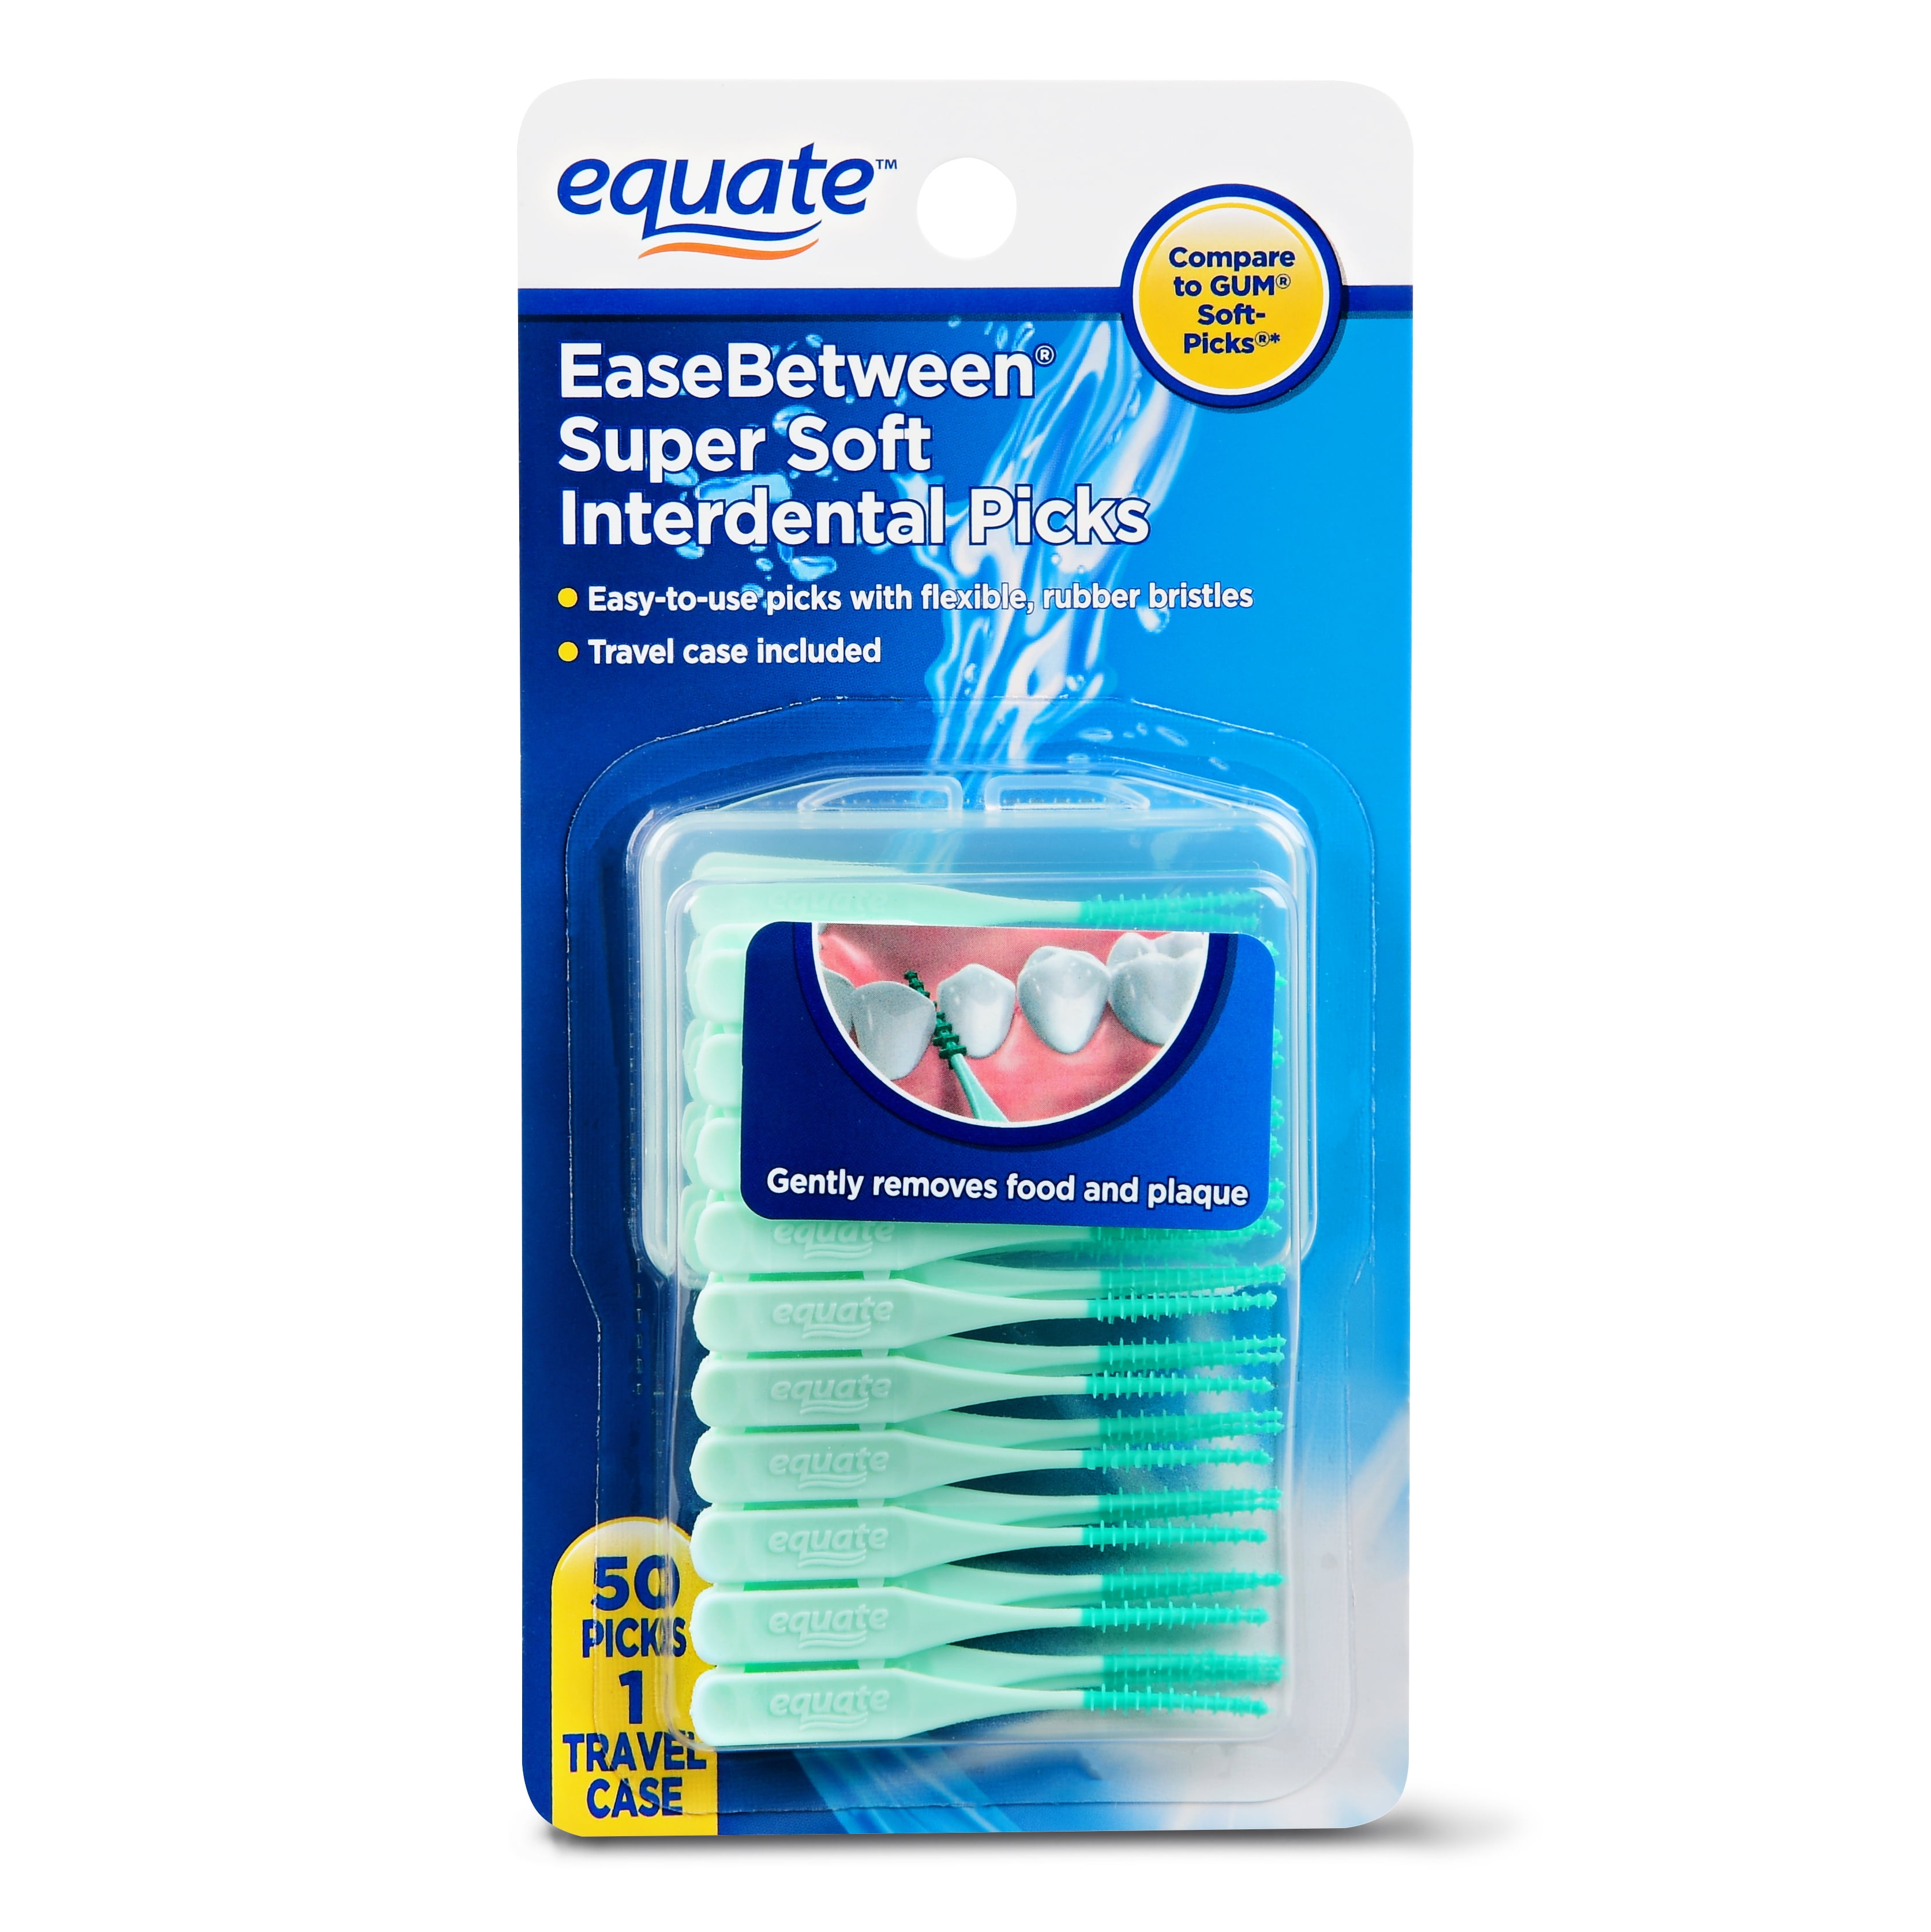 Equate EaseBetween Super Soft Interdental Picks, Value Pack with Convenient Travel Case, Flexible Bristles, Standard Teeth Spacing, 50 Count